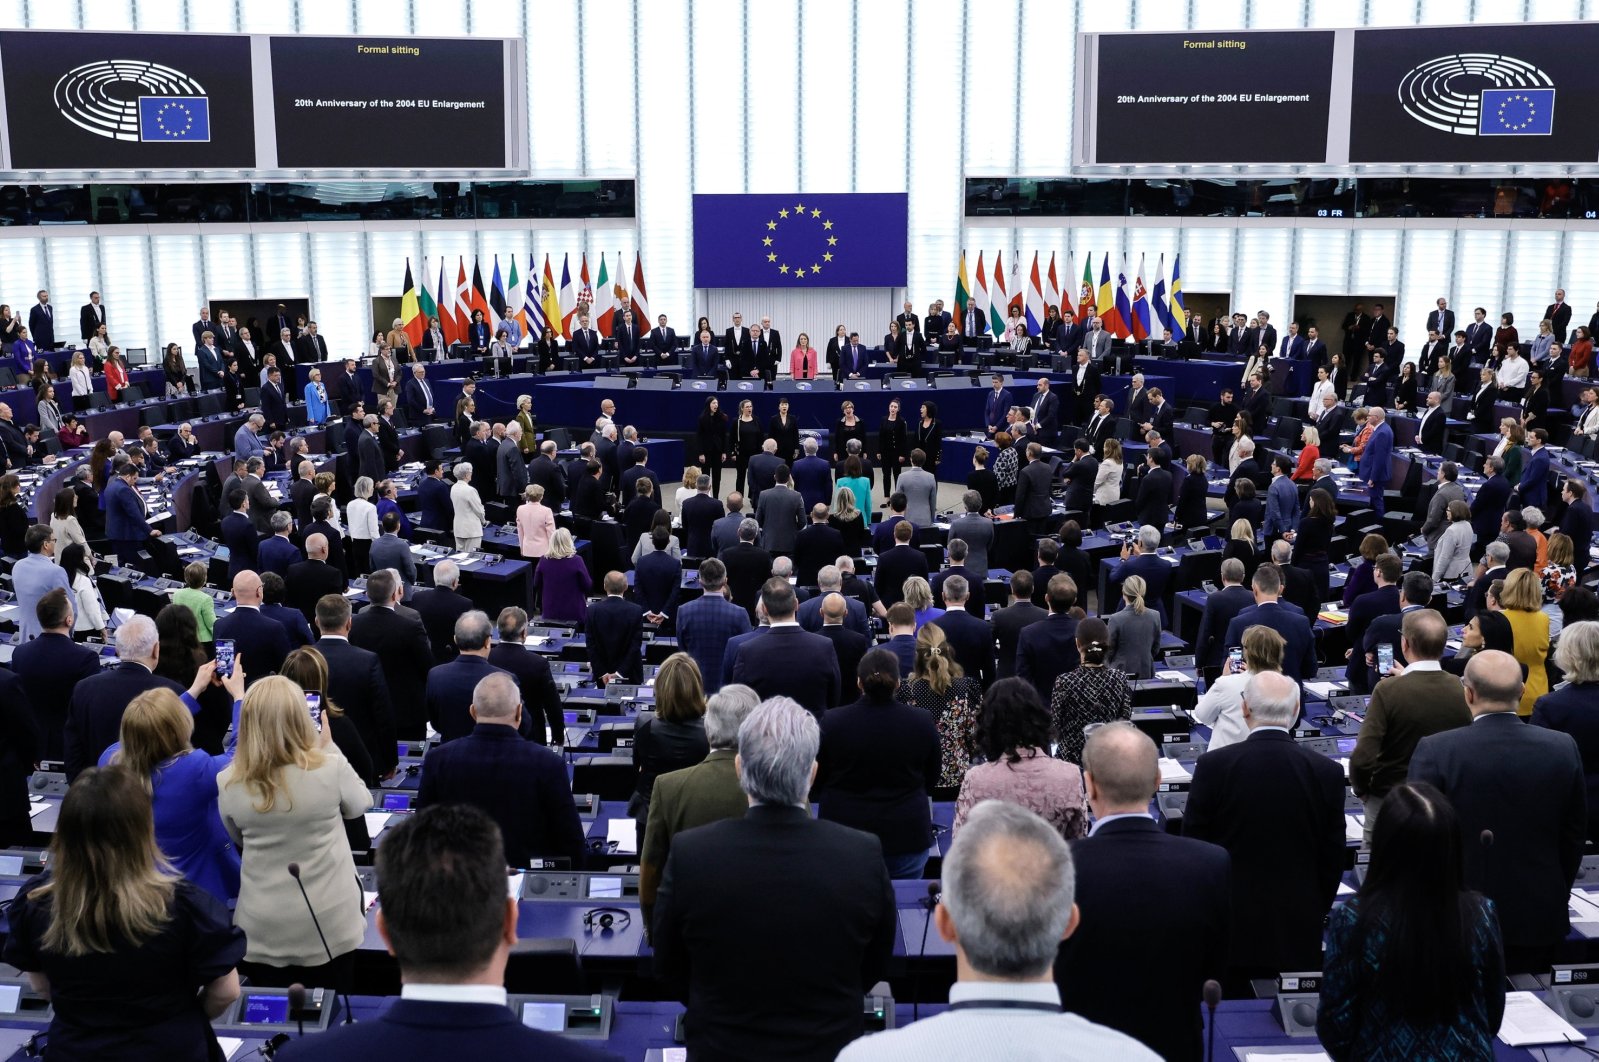 Members of the European Parliament stand as they listen to the European anthem during a formal sitting on the 20th anniversary of the 2004 EU Enlargement at the European Parliament in Strasbourg, France, April 24, 2024. (EPA Photo)